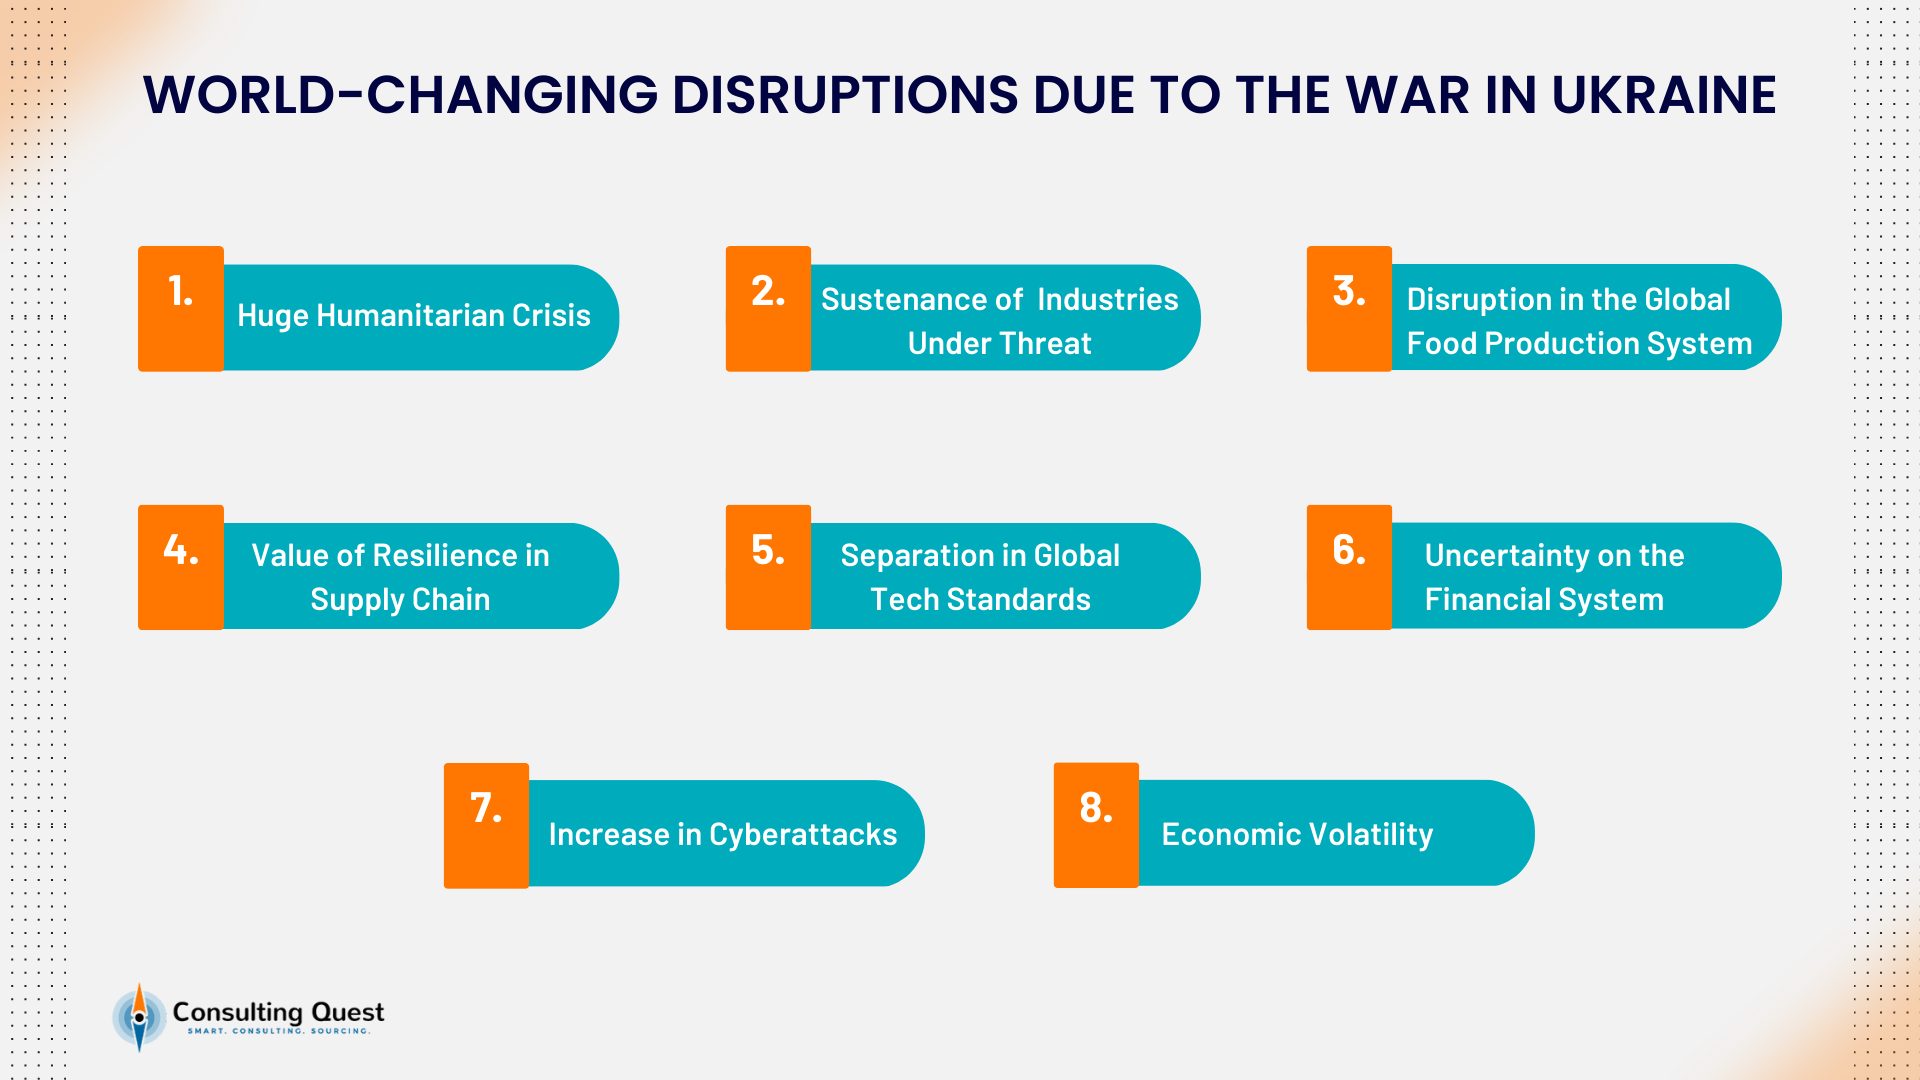 World changing disruptions due to the war in Ukraine